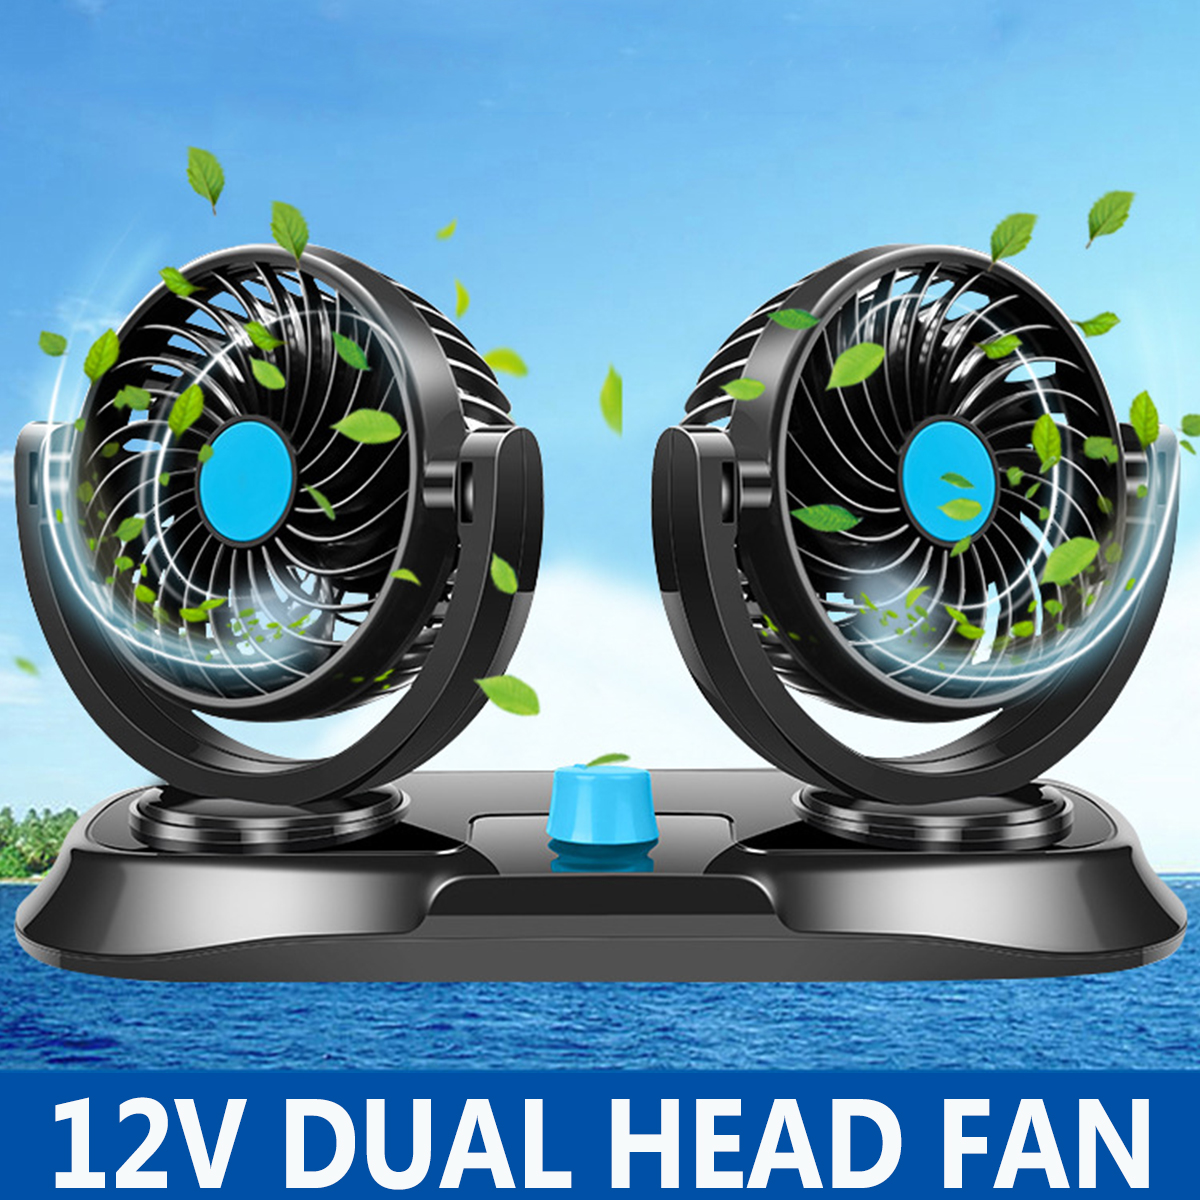 12V-Adjustable-Double-360-Degrees-Mini-Oscillating-Fan-Rotation-Cooling-Fan-Air-Conditioner-1338437-1